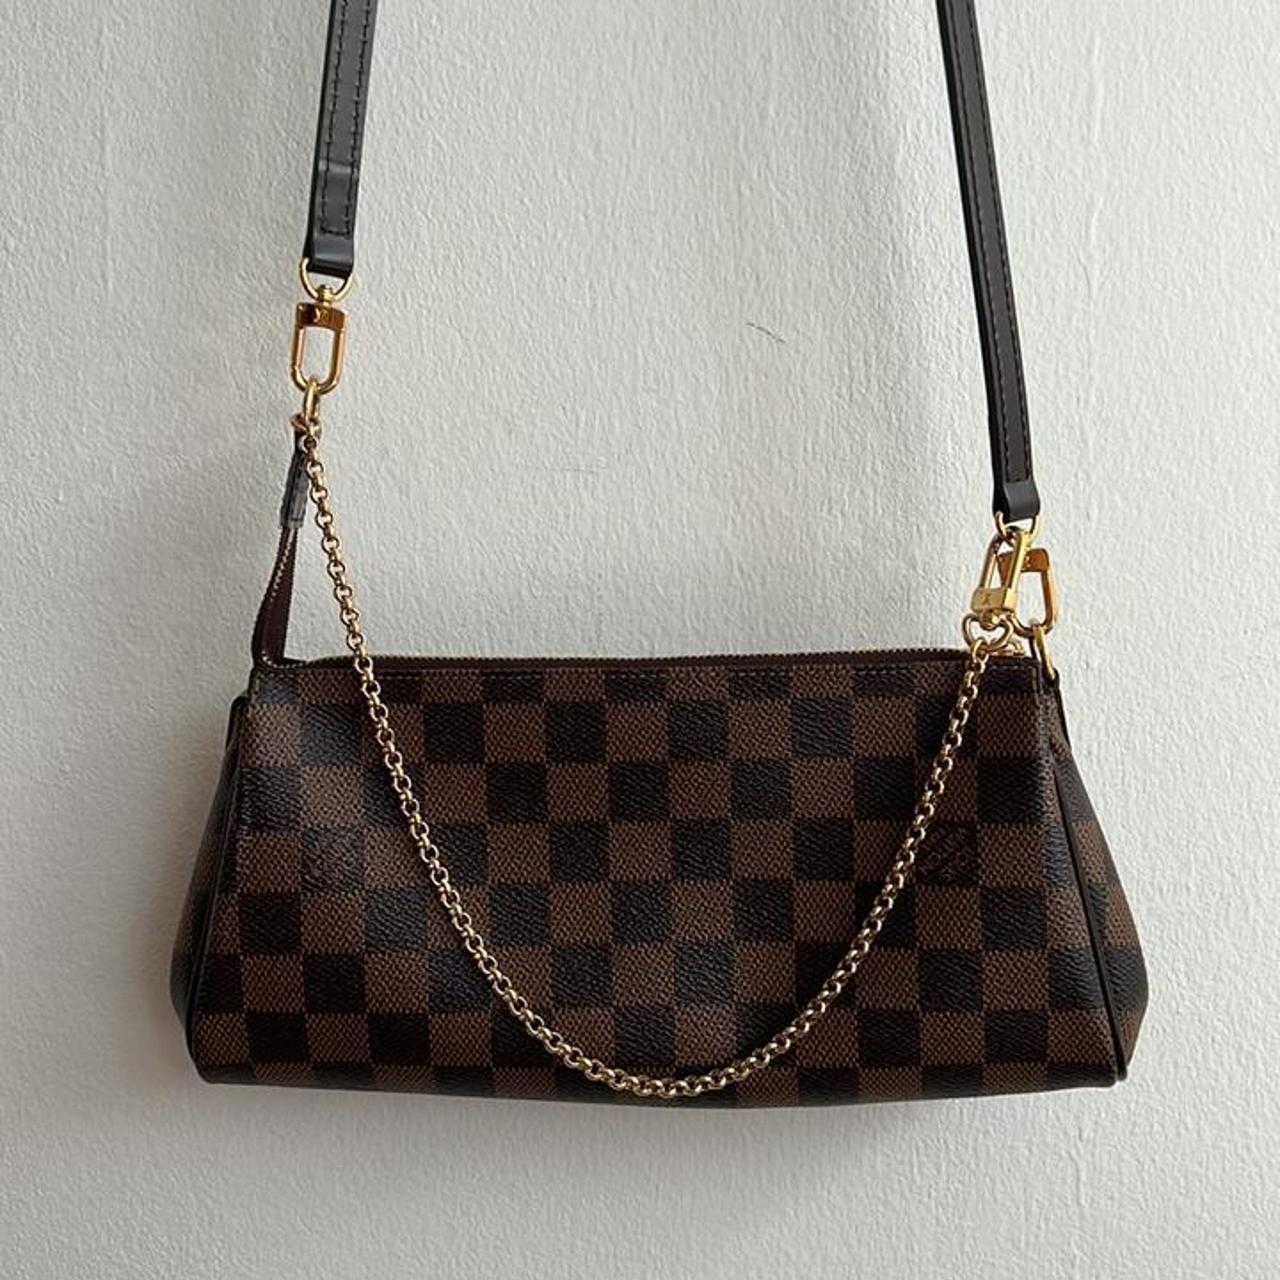 I don't think the Louis Vuitton Eva bag will ever go out of style. #lv